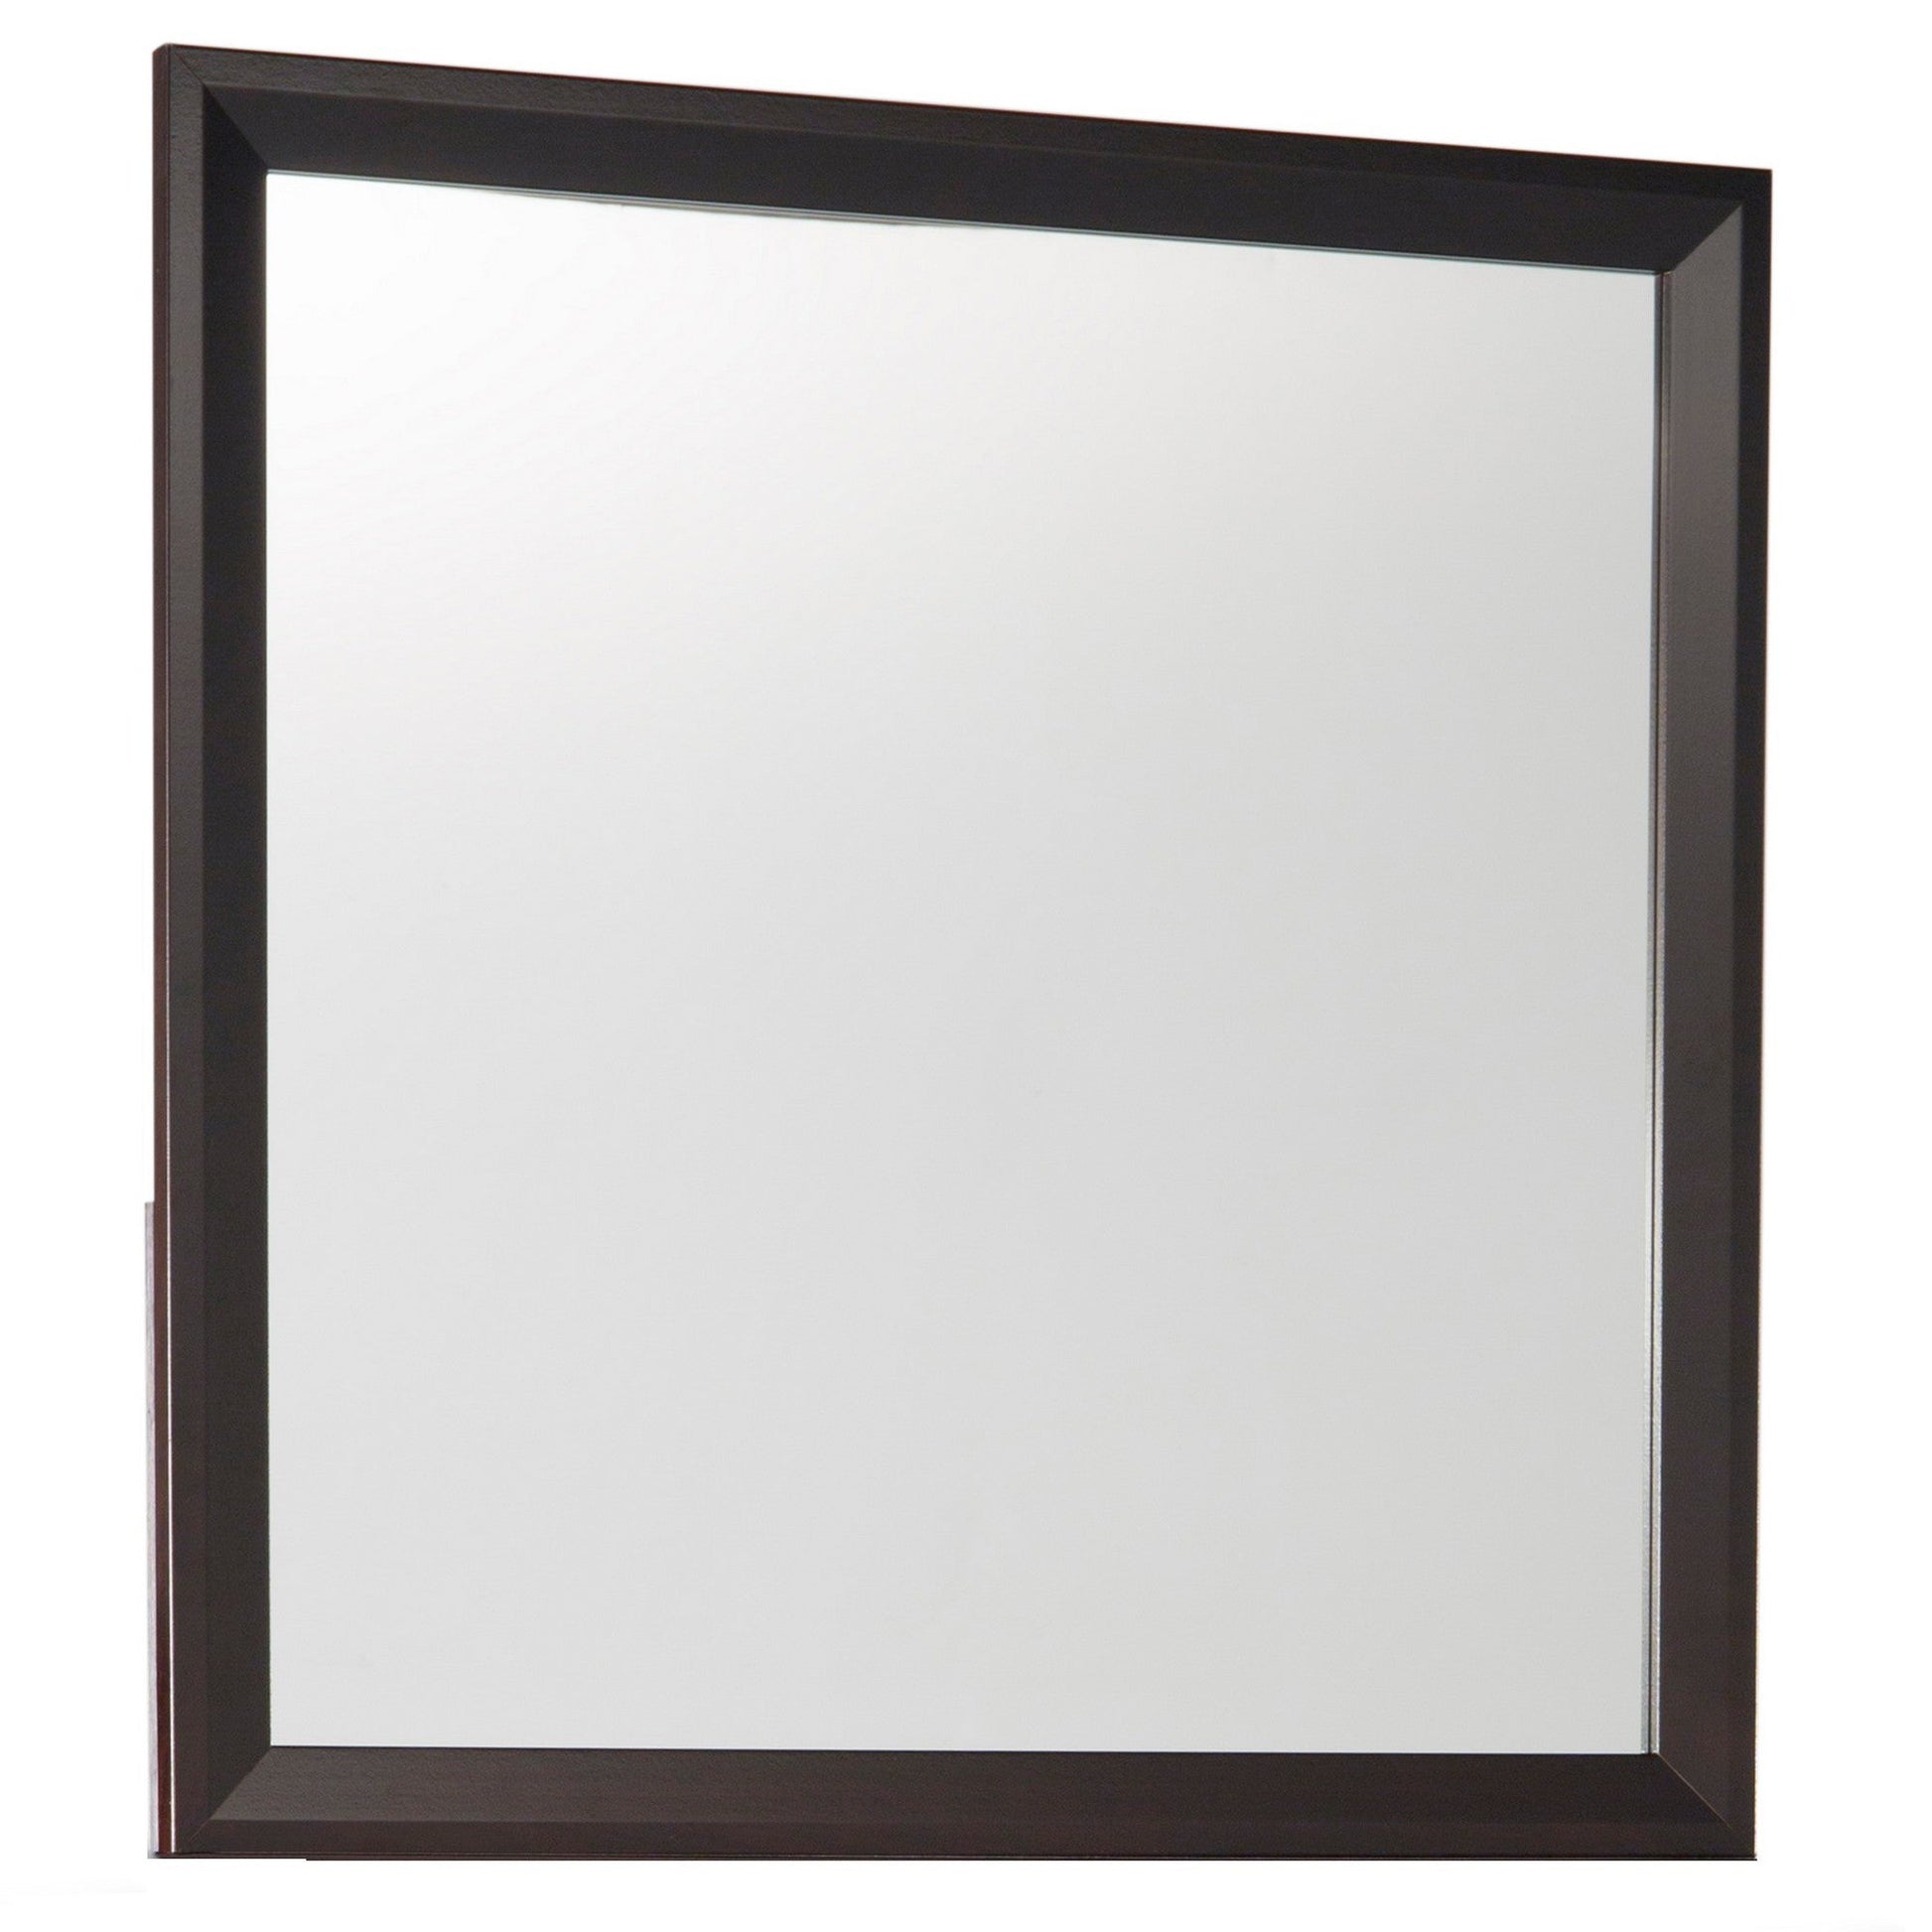 Benzara Cherry Brown and Silver Square Wooden Frame Mirror With Mounting Hardware